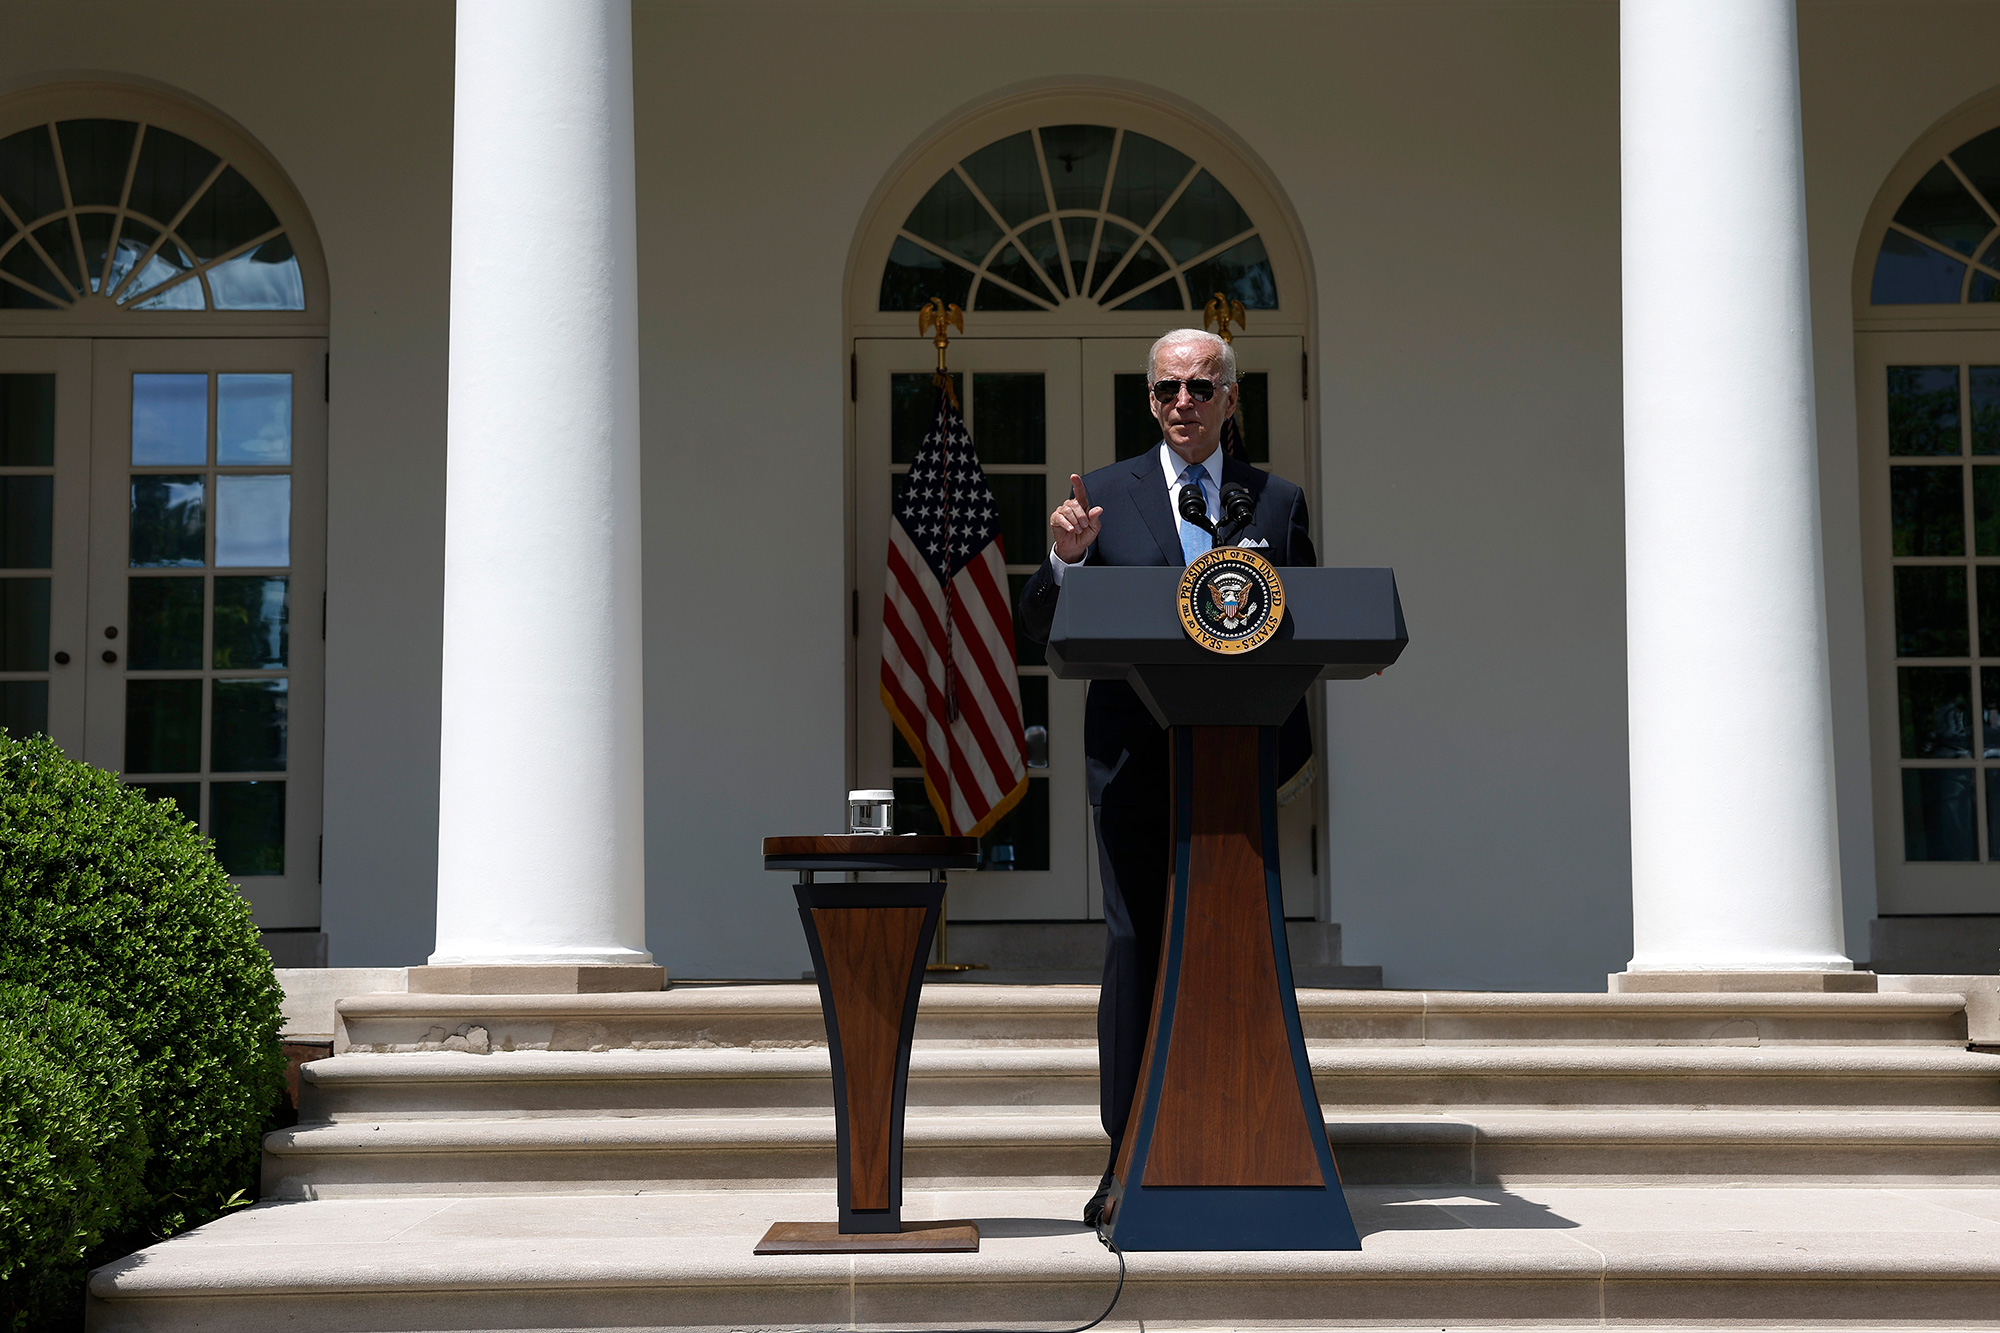 U.S. President Joe Biden delivers remarks at the White House in Washington, DC., on July 27.